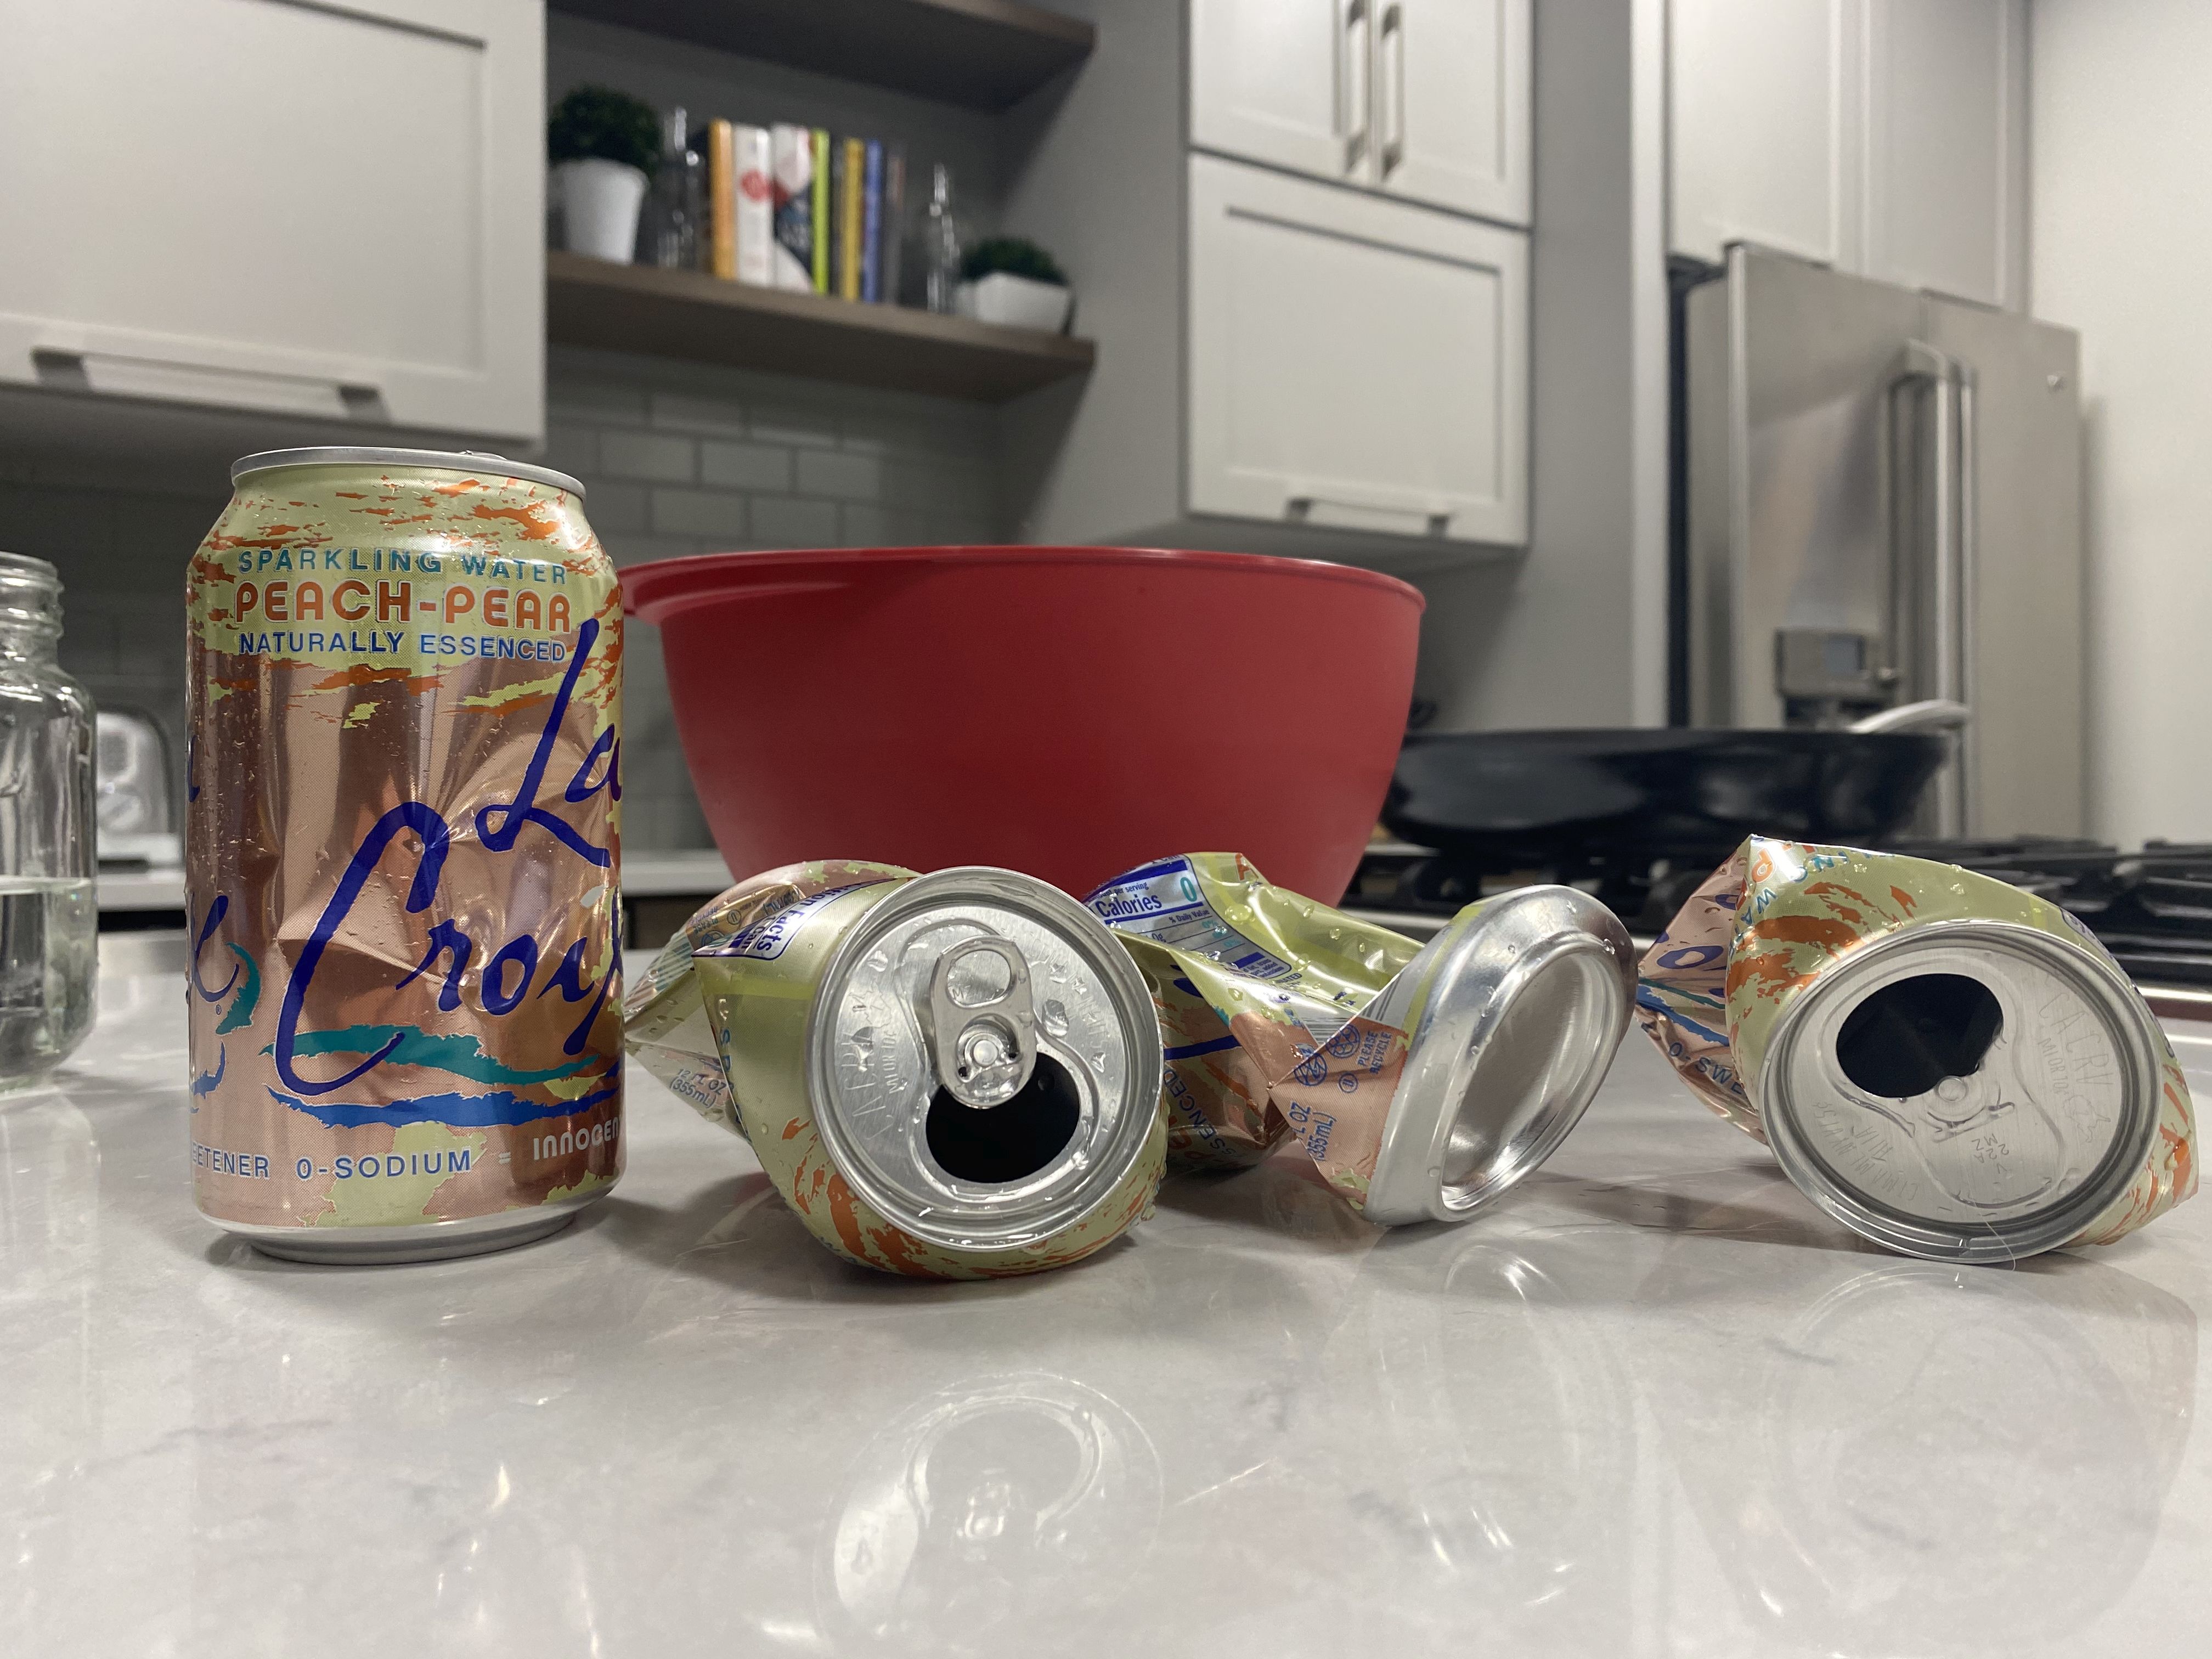 crushed soda can experiment